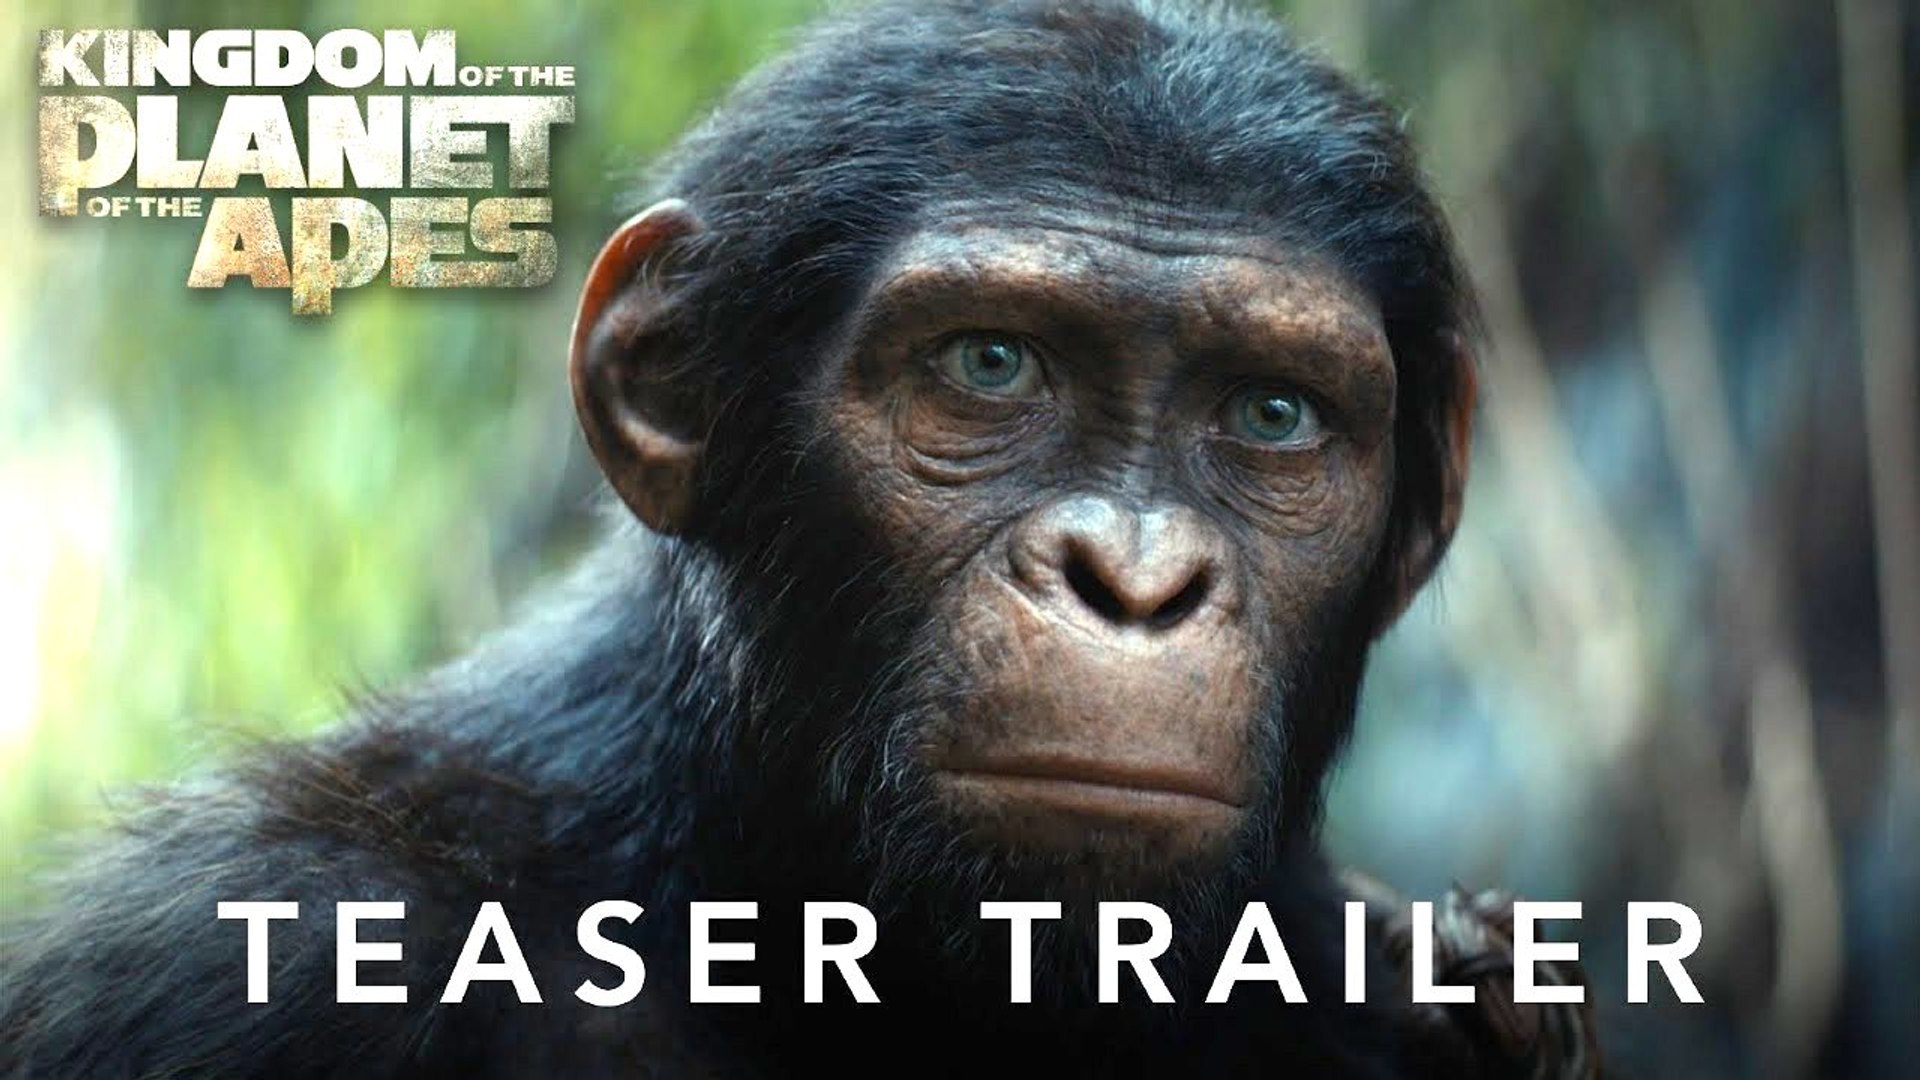 Kingdom of the Planet of the Apes | Super Bowl Trailer